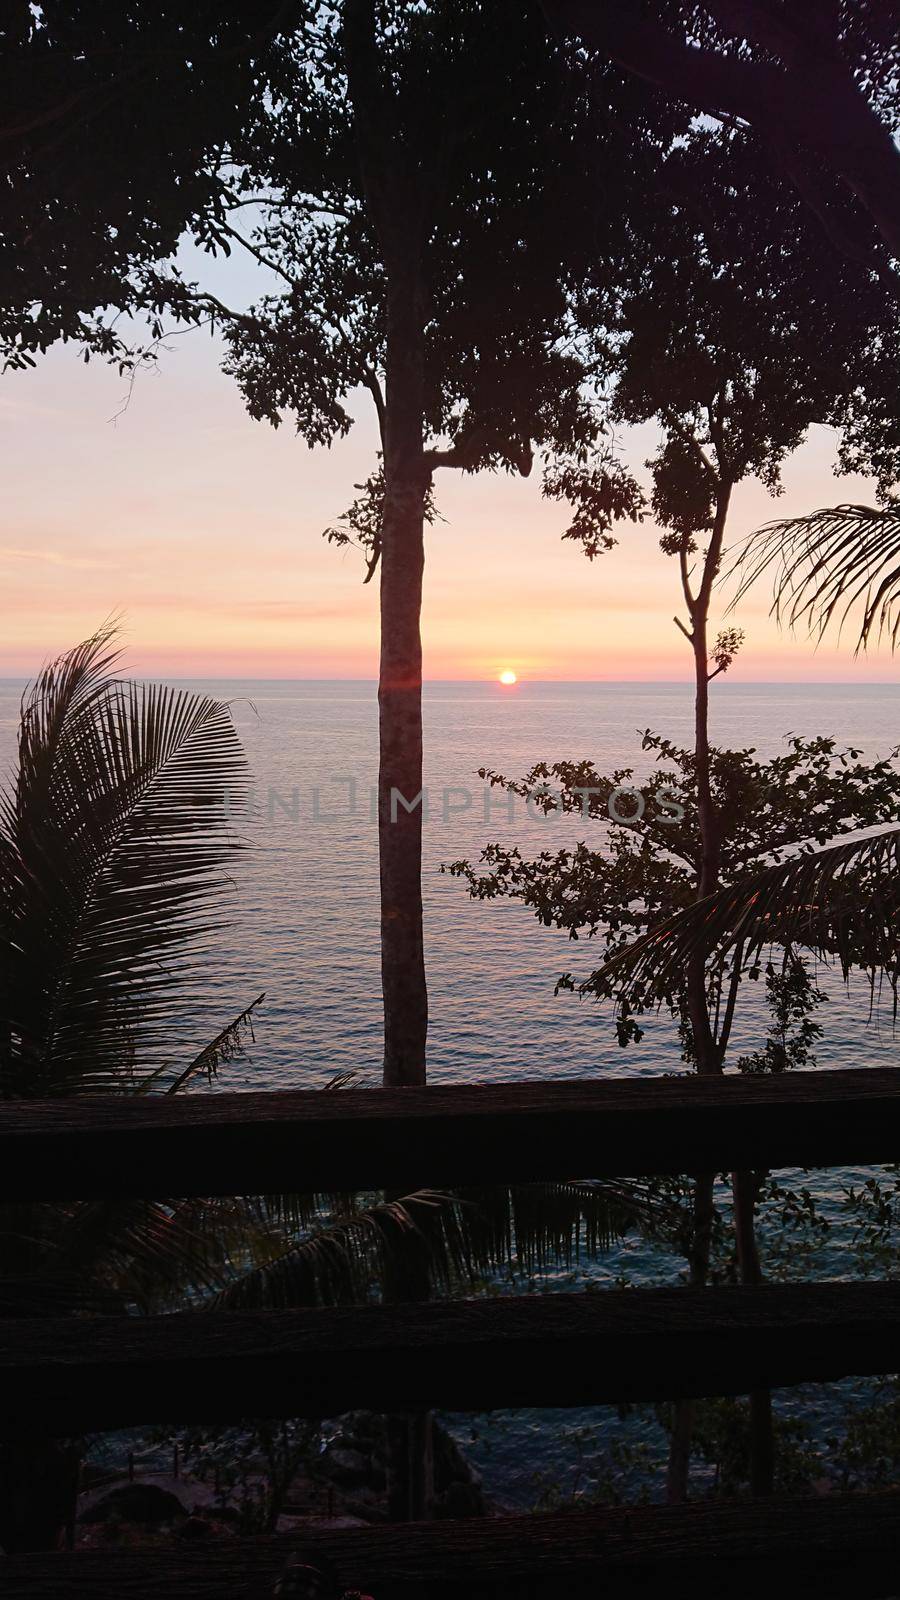 The sunset with views of the sea and palm trees. The sun goes below the horizon. An orange ray of sunlight is reflected on the water. Palm trees stand near the sea. Small clouds float across the sky.